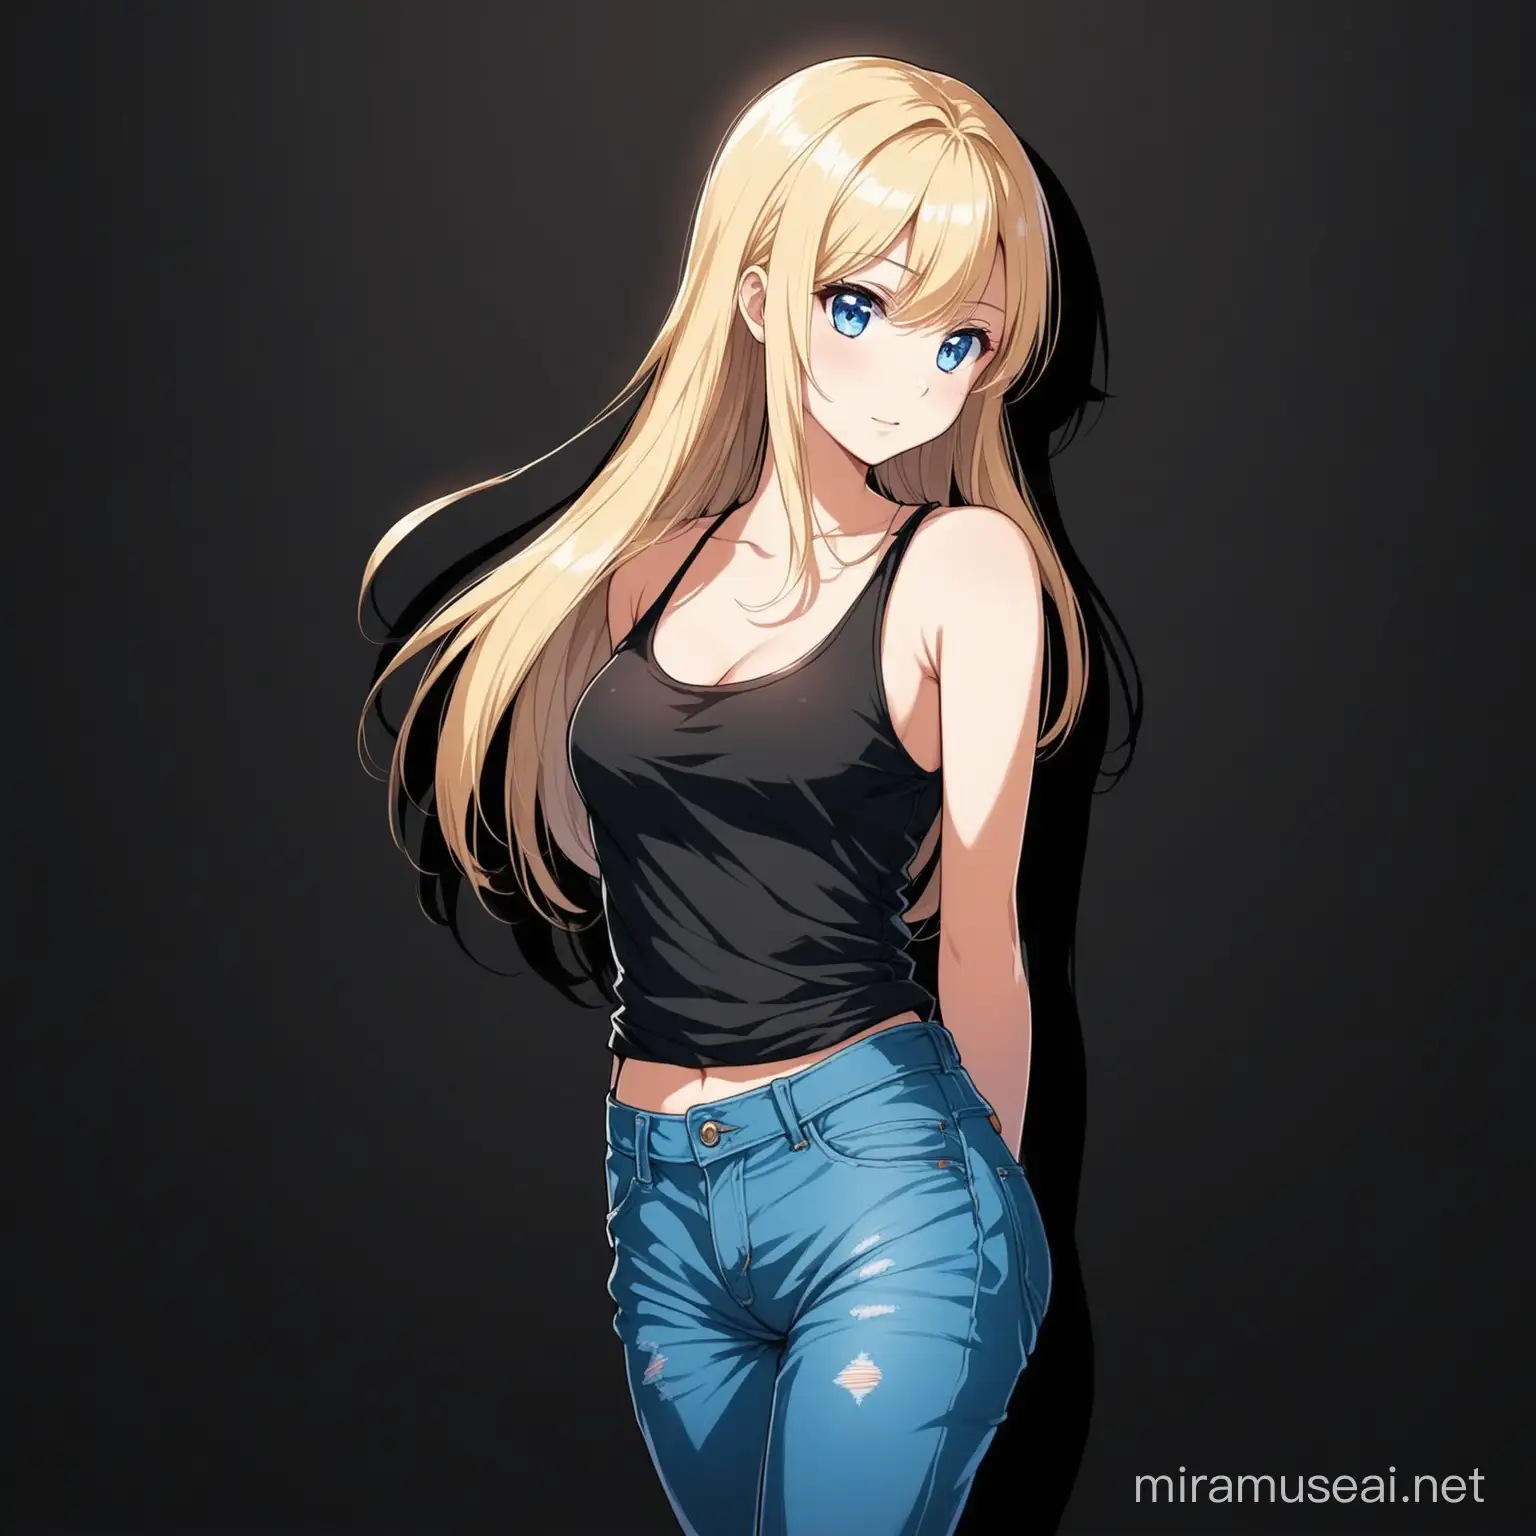 AnimeStyle 25 Year Old Woman with Blonde Hair and Black Outfit